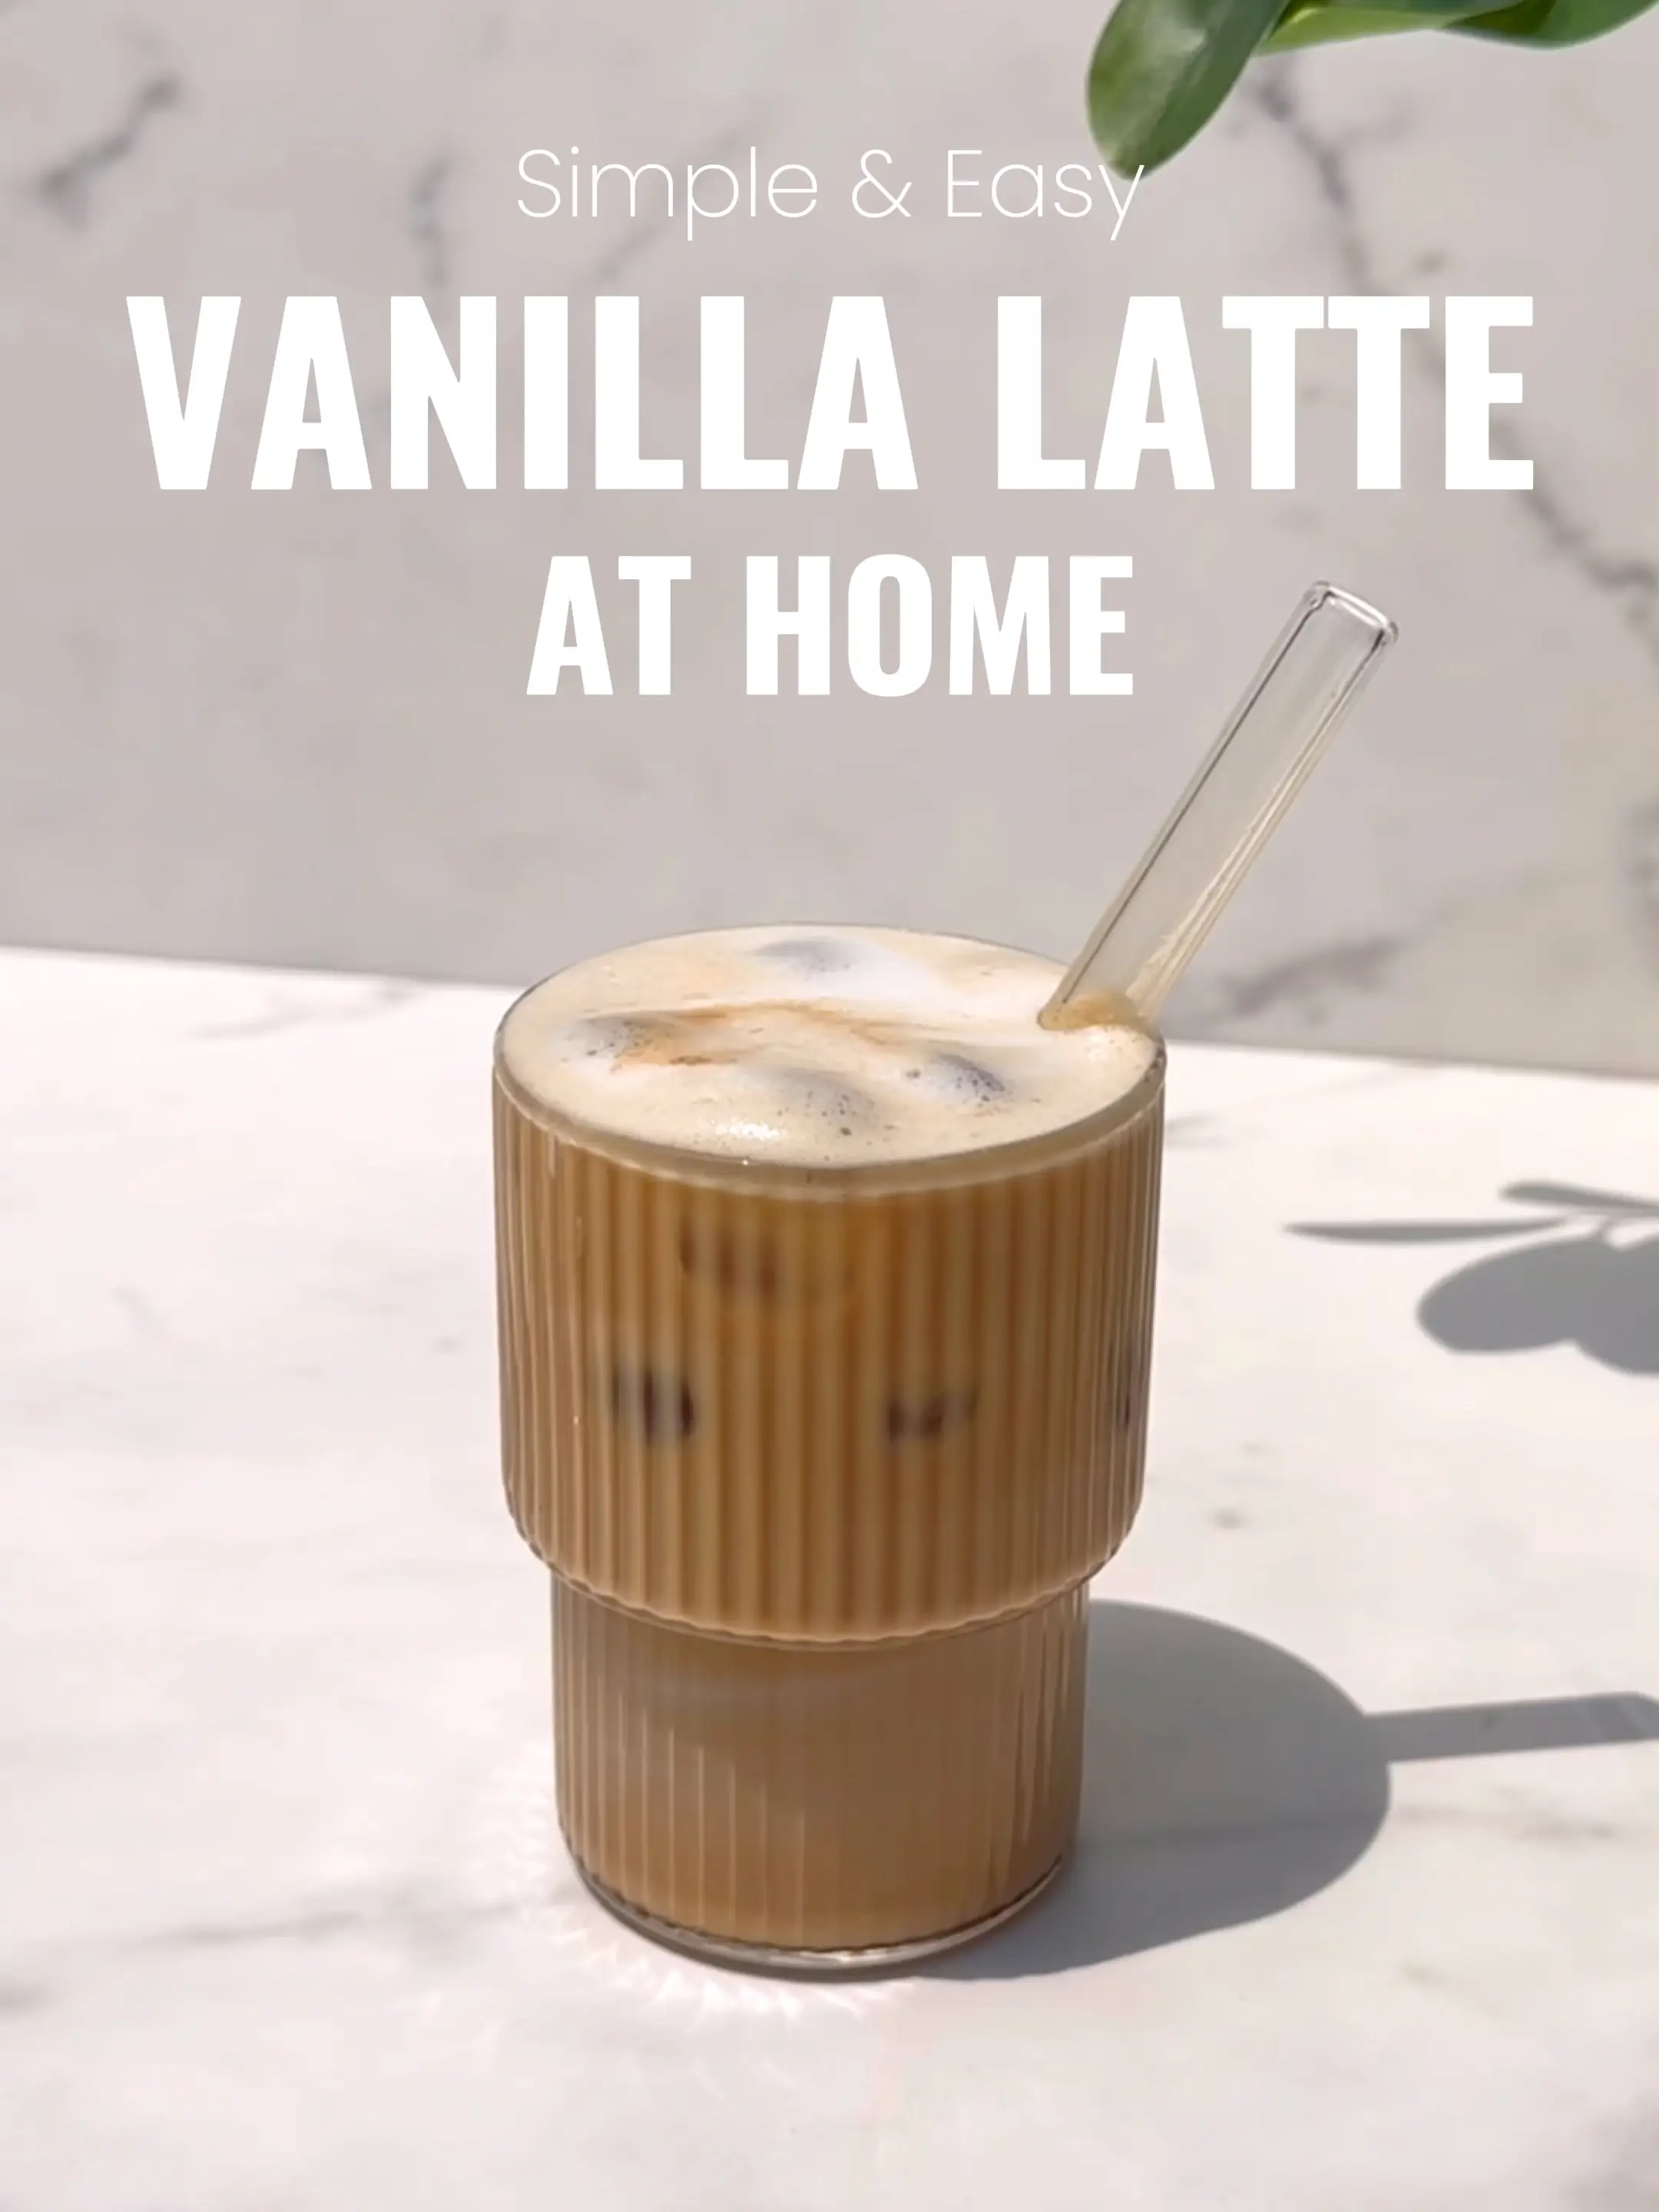 Iced Latte At Home Without A Coffee Machine!, Video published by  Bblancivyy